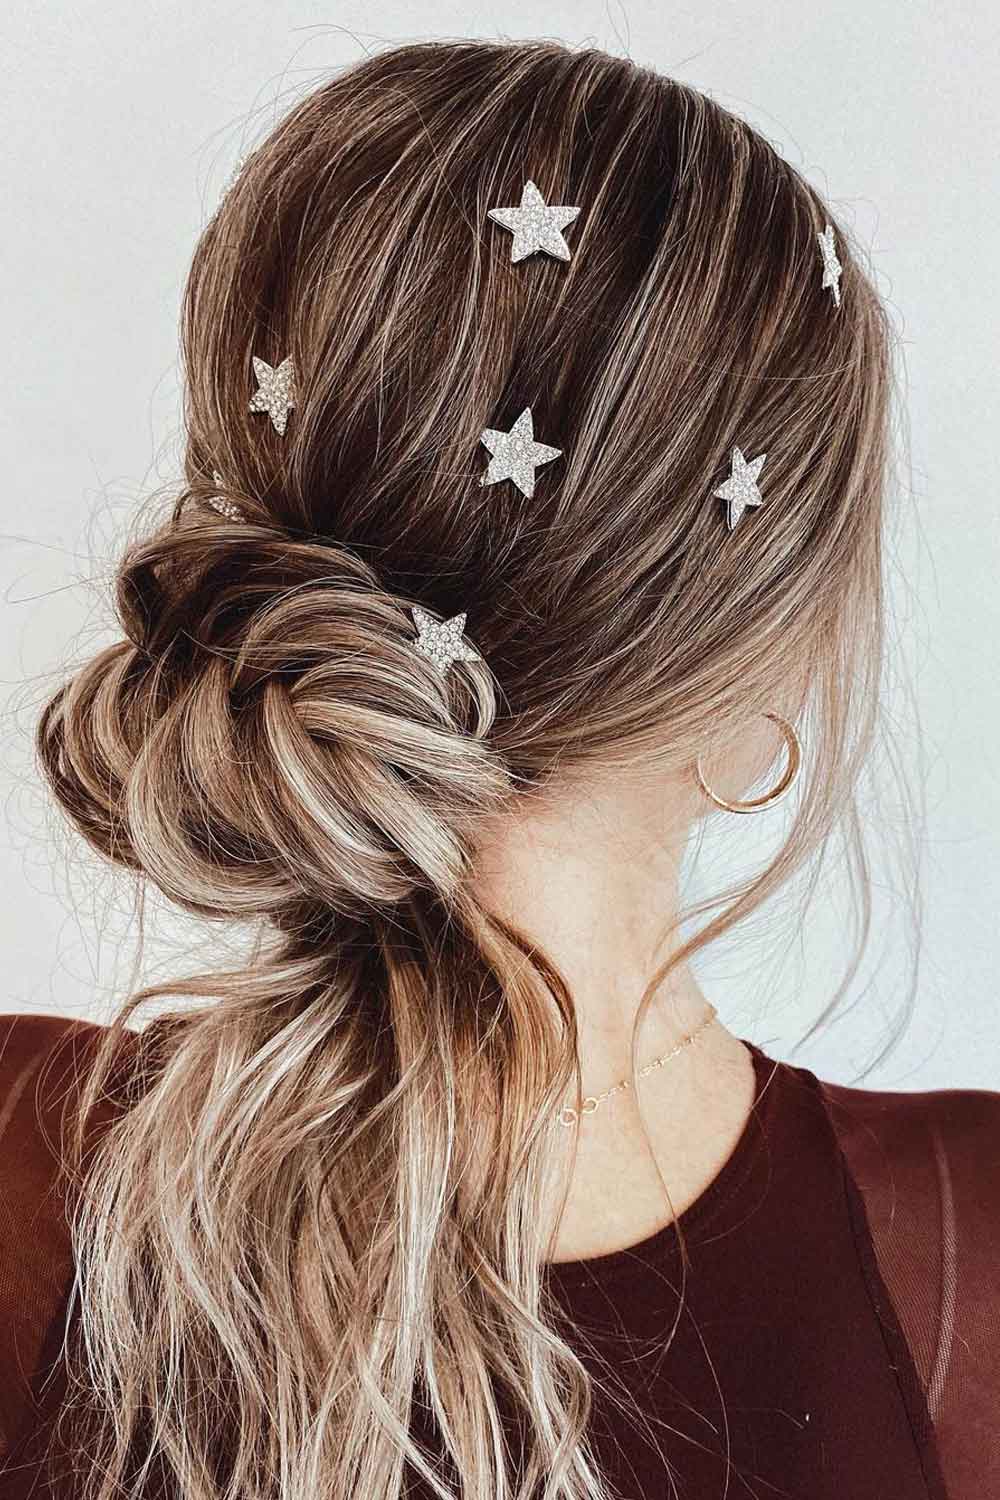 Ponytail Hairstyle with Star Accessories